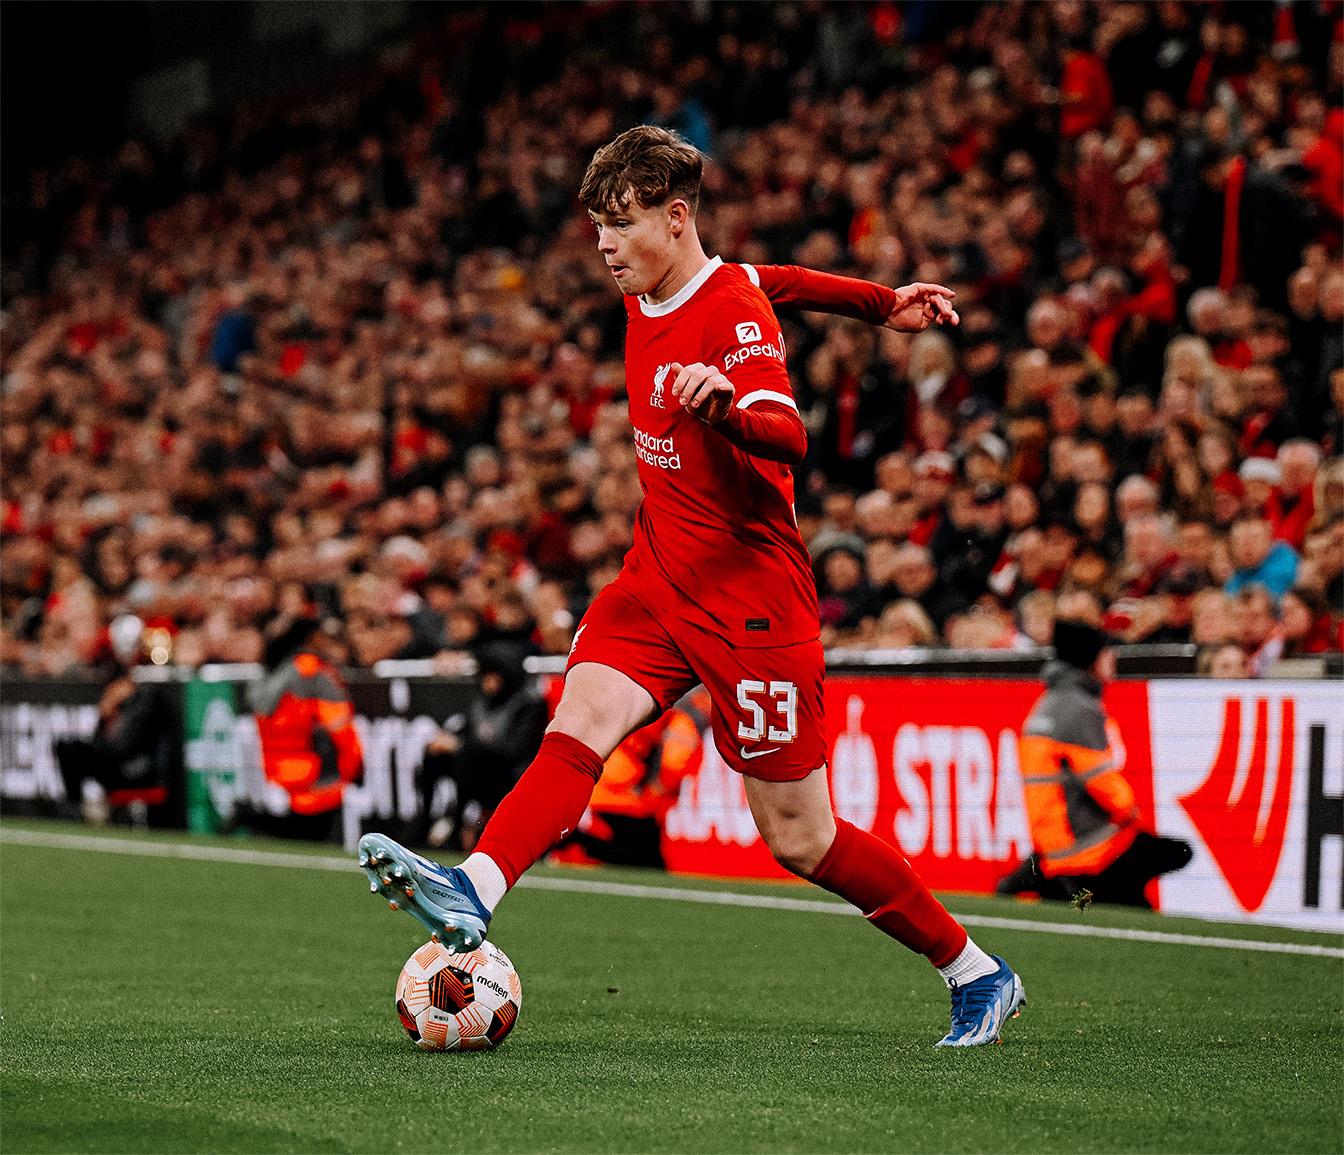 Meet the Academy: James McConnell on PL debut, Klopp hugs and playing No.6  - Liverpool FC